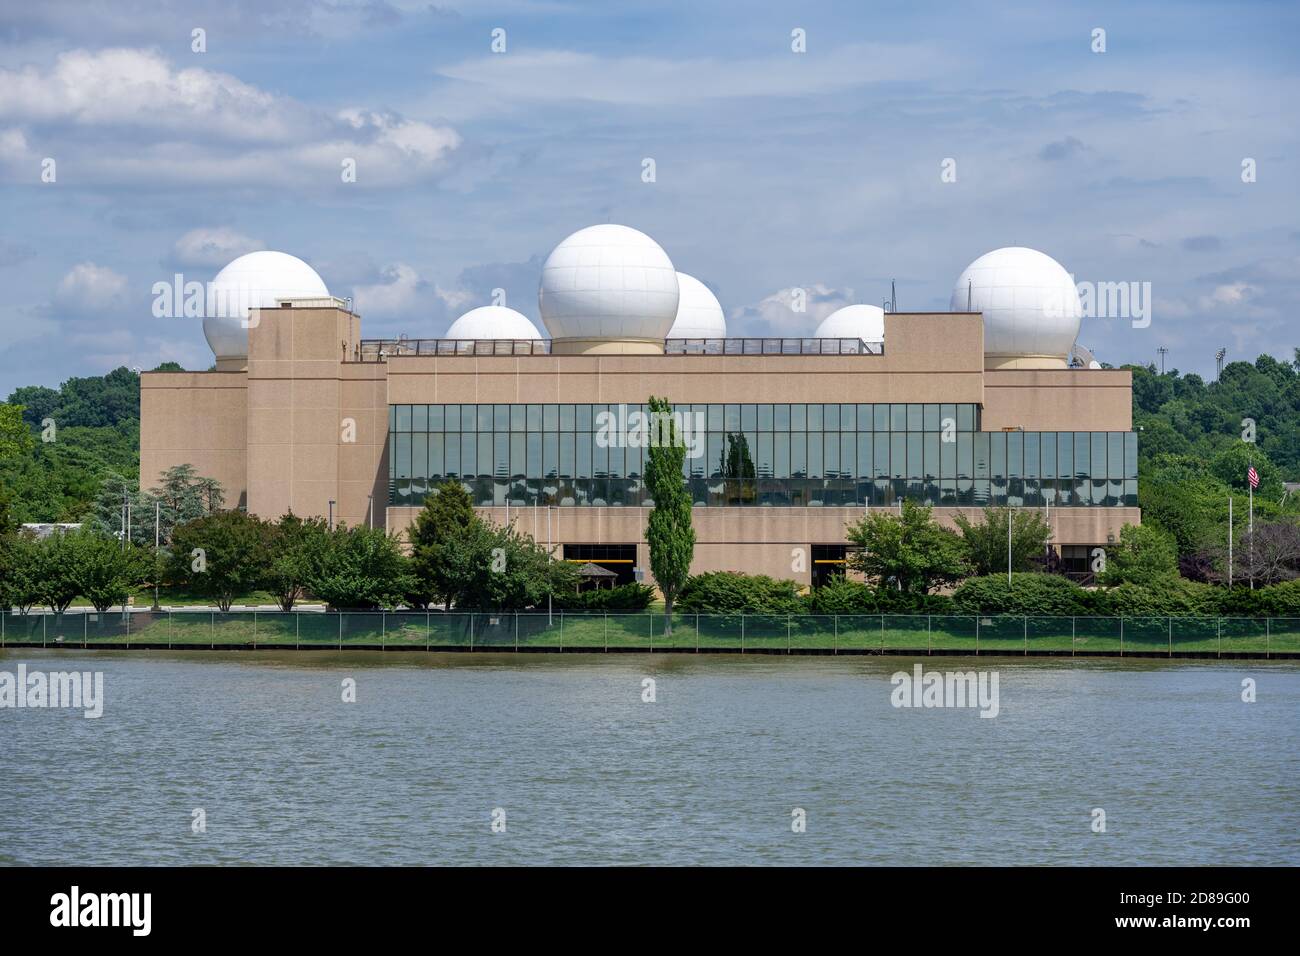 Prominent white radomes on the roof of this building in the US Navy Research laboratory campus allude to NRL's pioneering work on radar  development Stock Photo